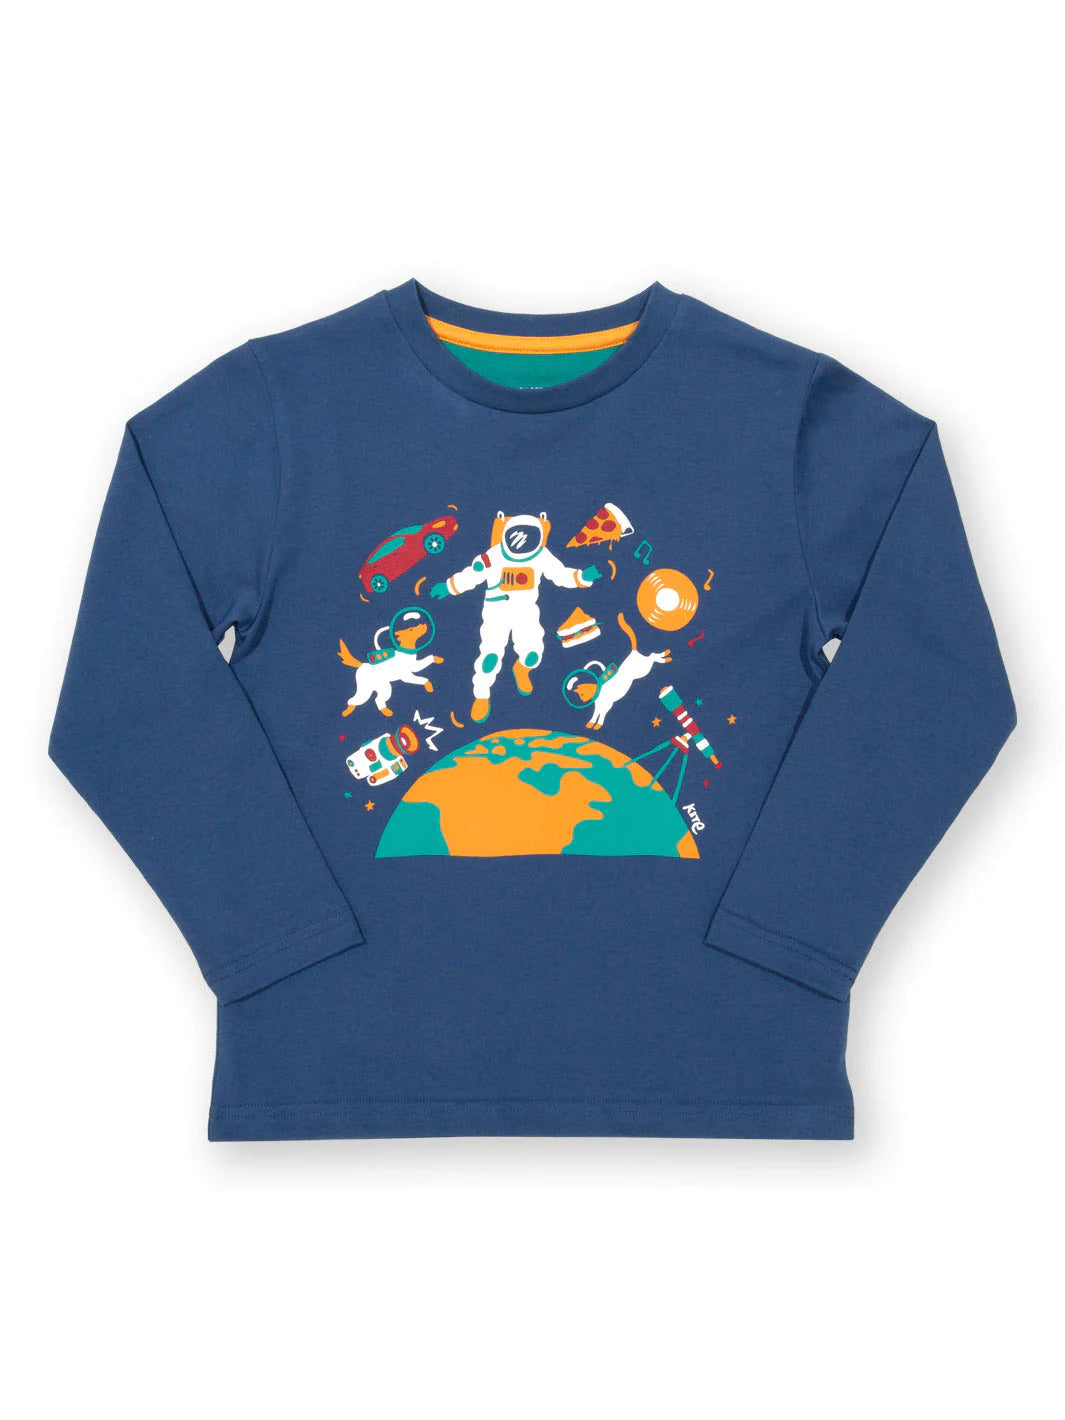 Stuff in Space Long Sleeve T-shirt